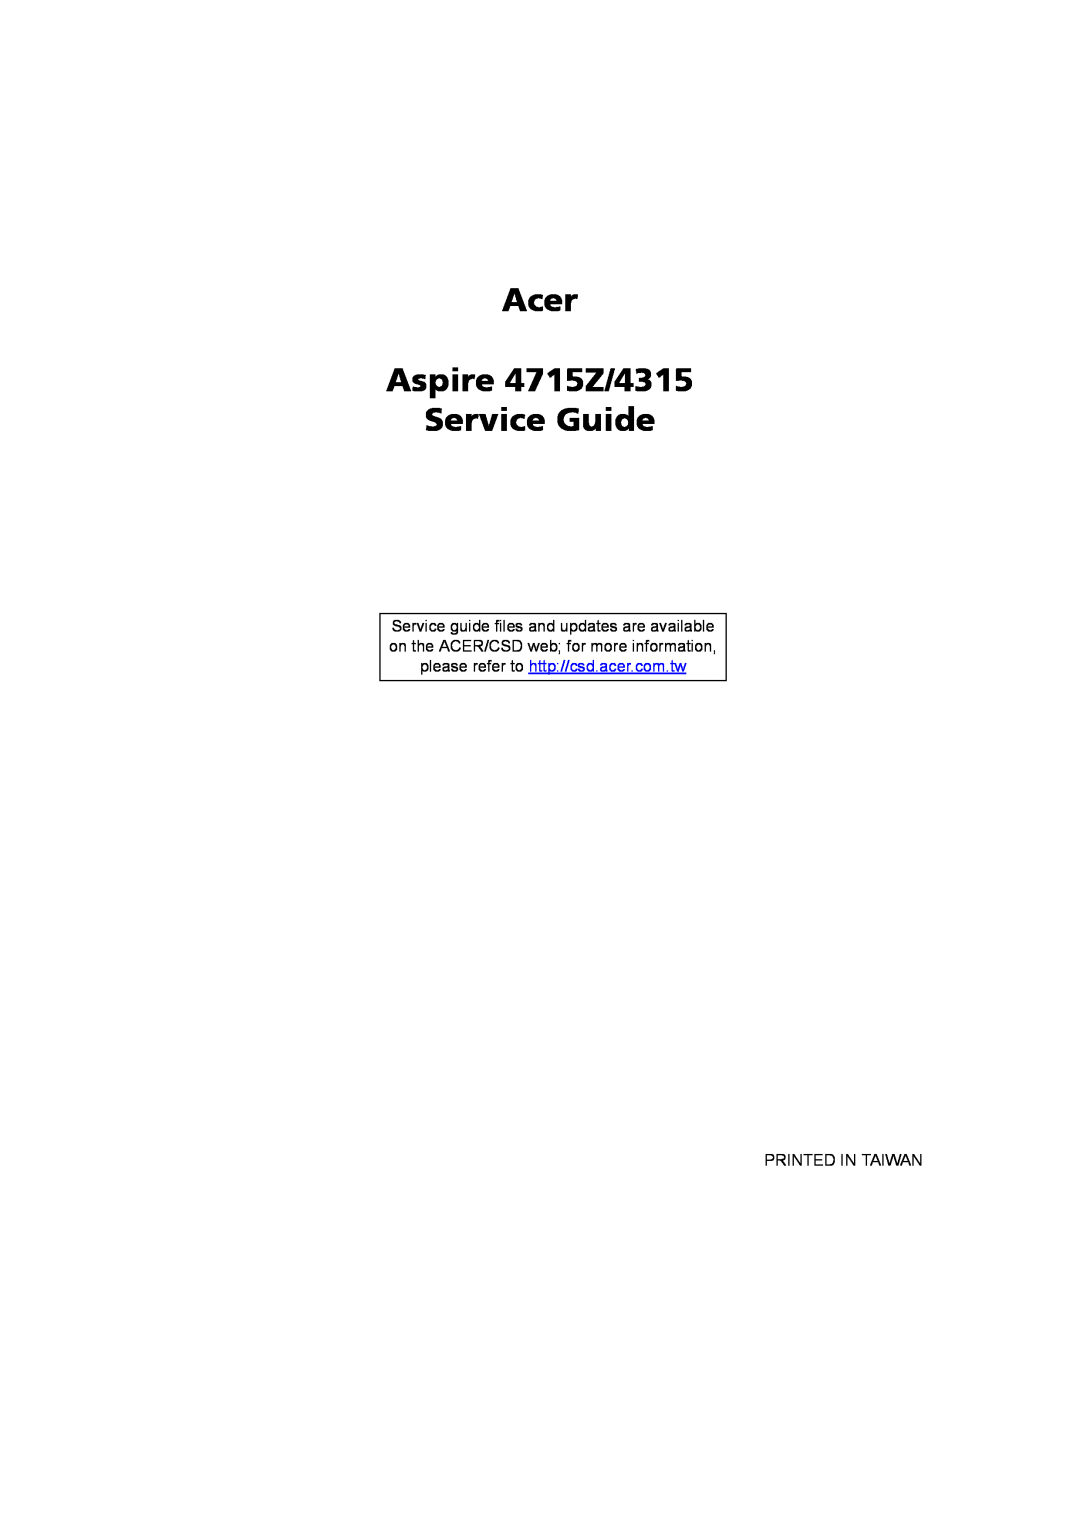 Acer manual Acer Aspire 4715Z/4315 Service Guide, Printed In Taiwan 